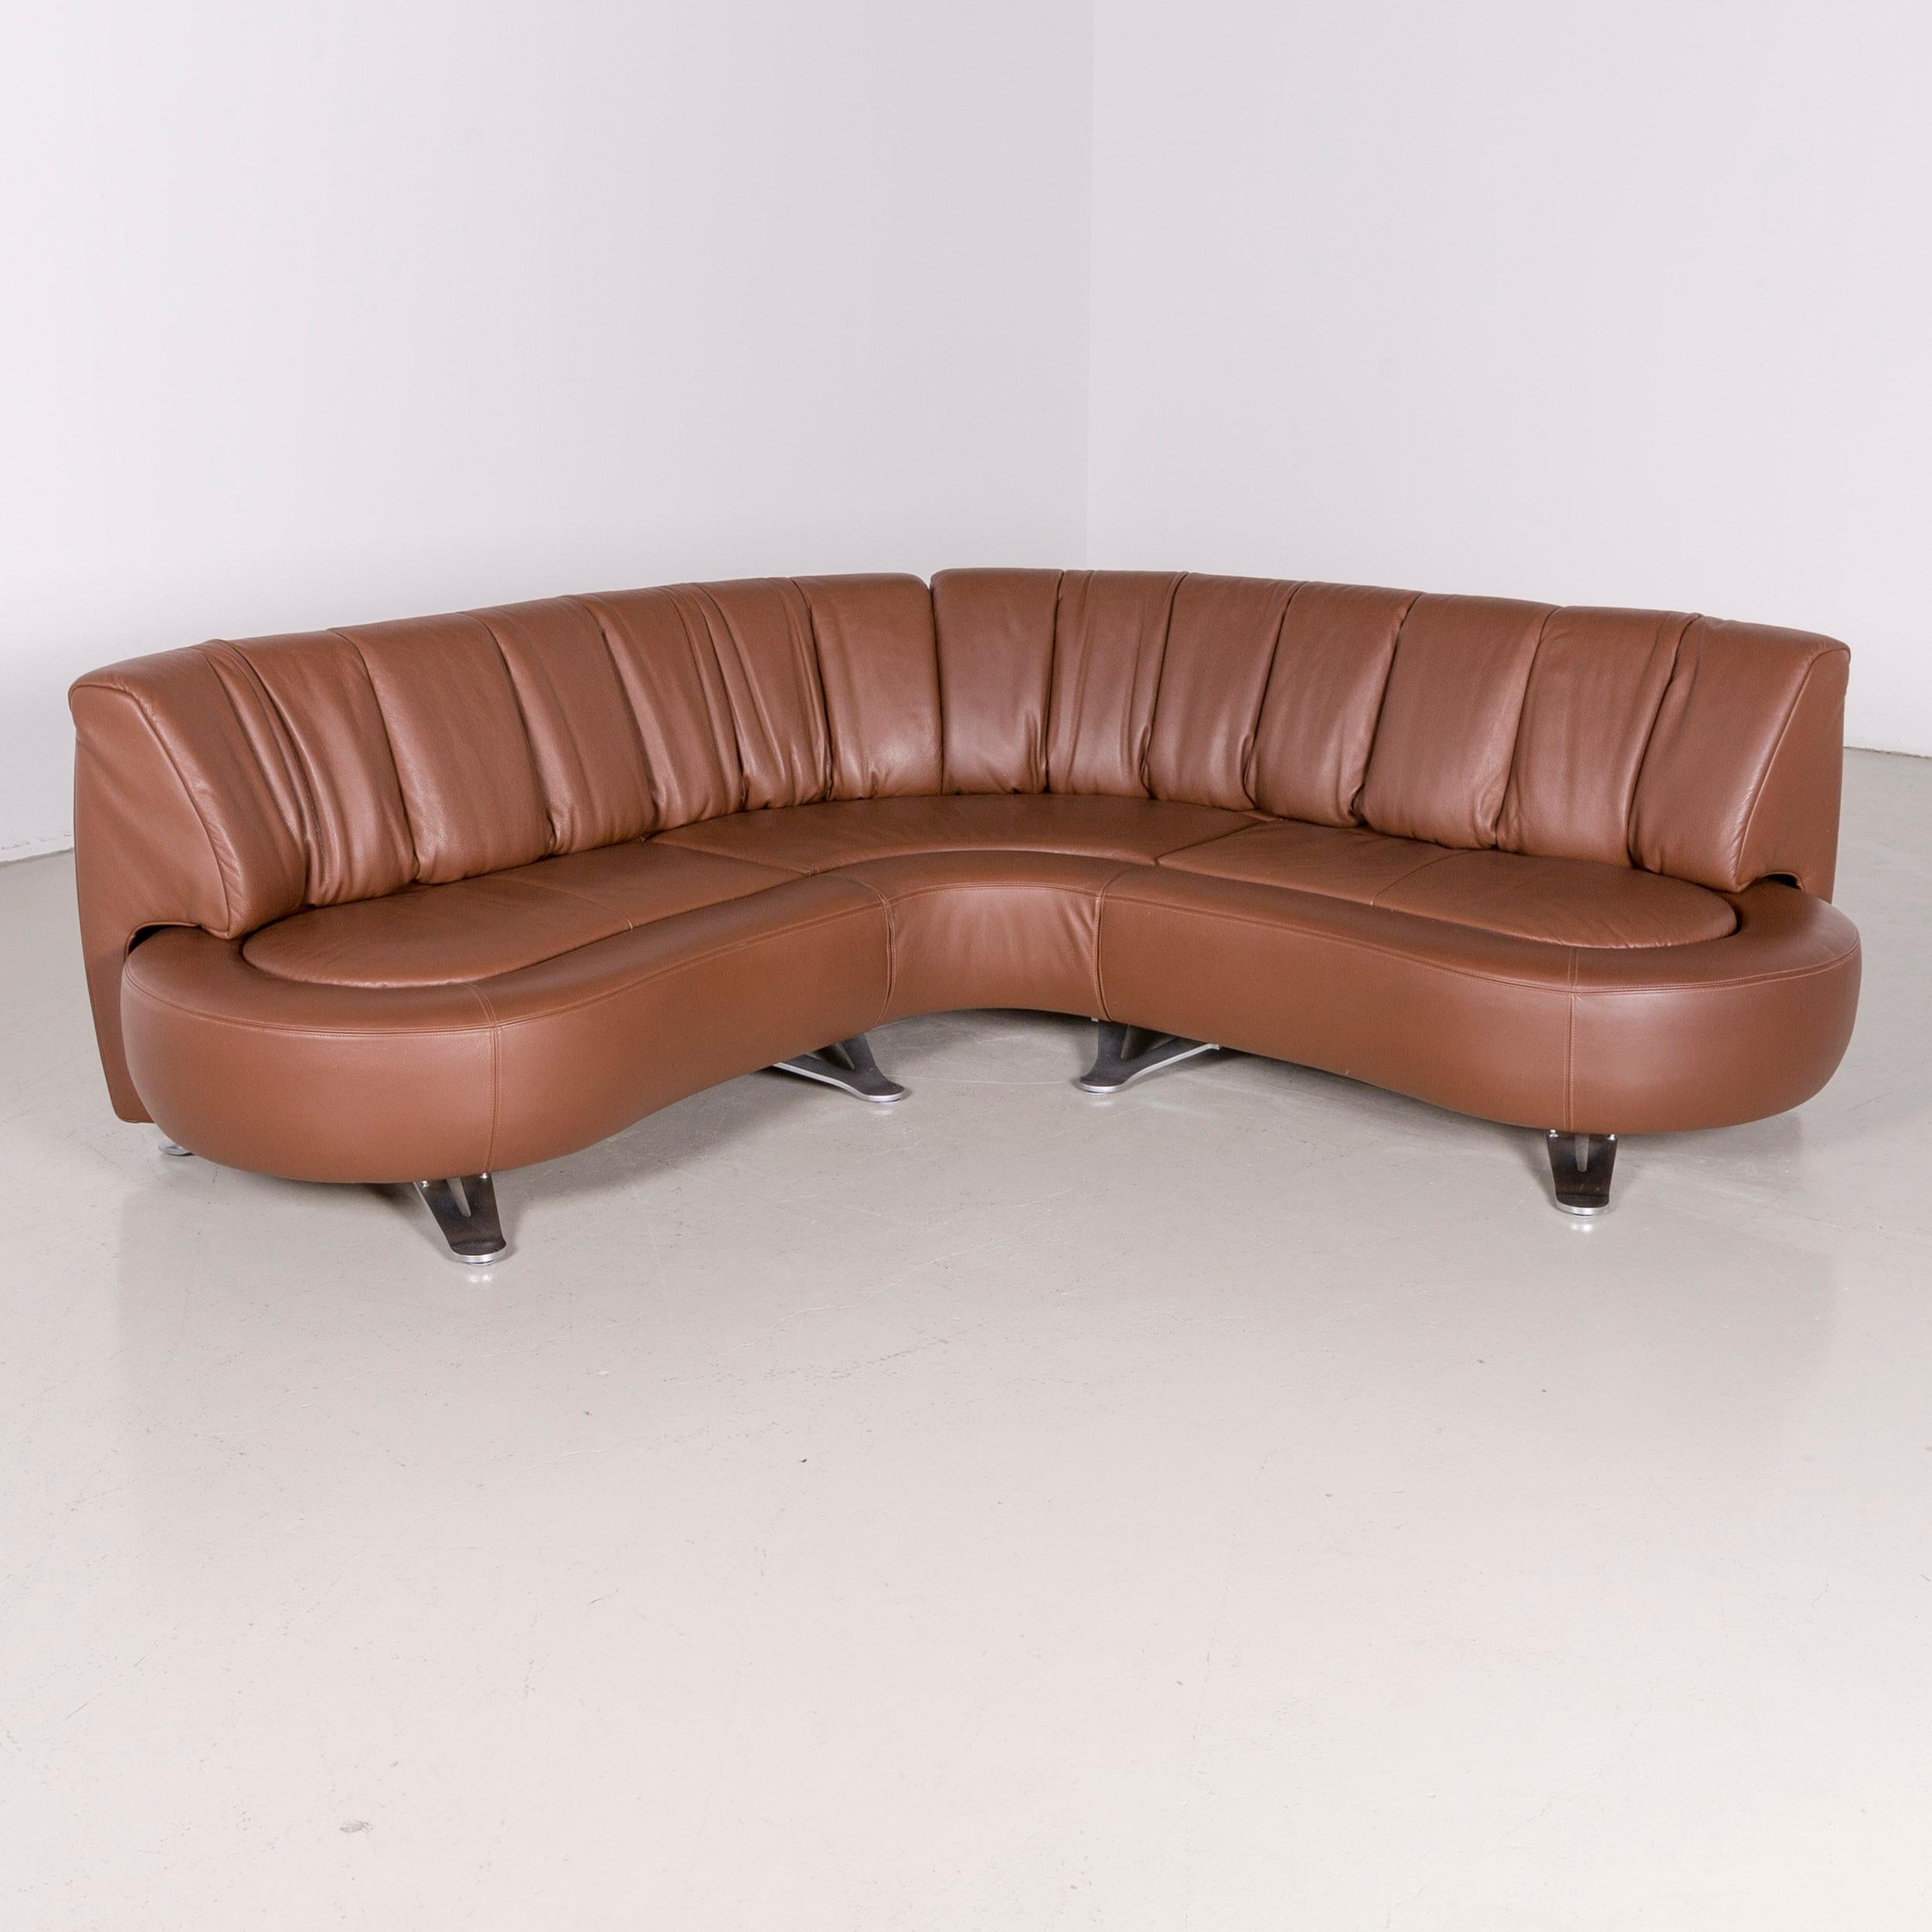 We bring to you a De Sede DS 1064 designer leather corner sofa brown genuine leather sofa.

Product measurements in centimeters:

Depth 225
Width 285
Height 80
Seat-height 37
Seat-depth 55
Seat-width 170
Back-height 45.


   